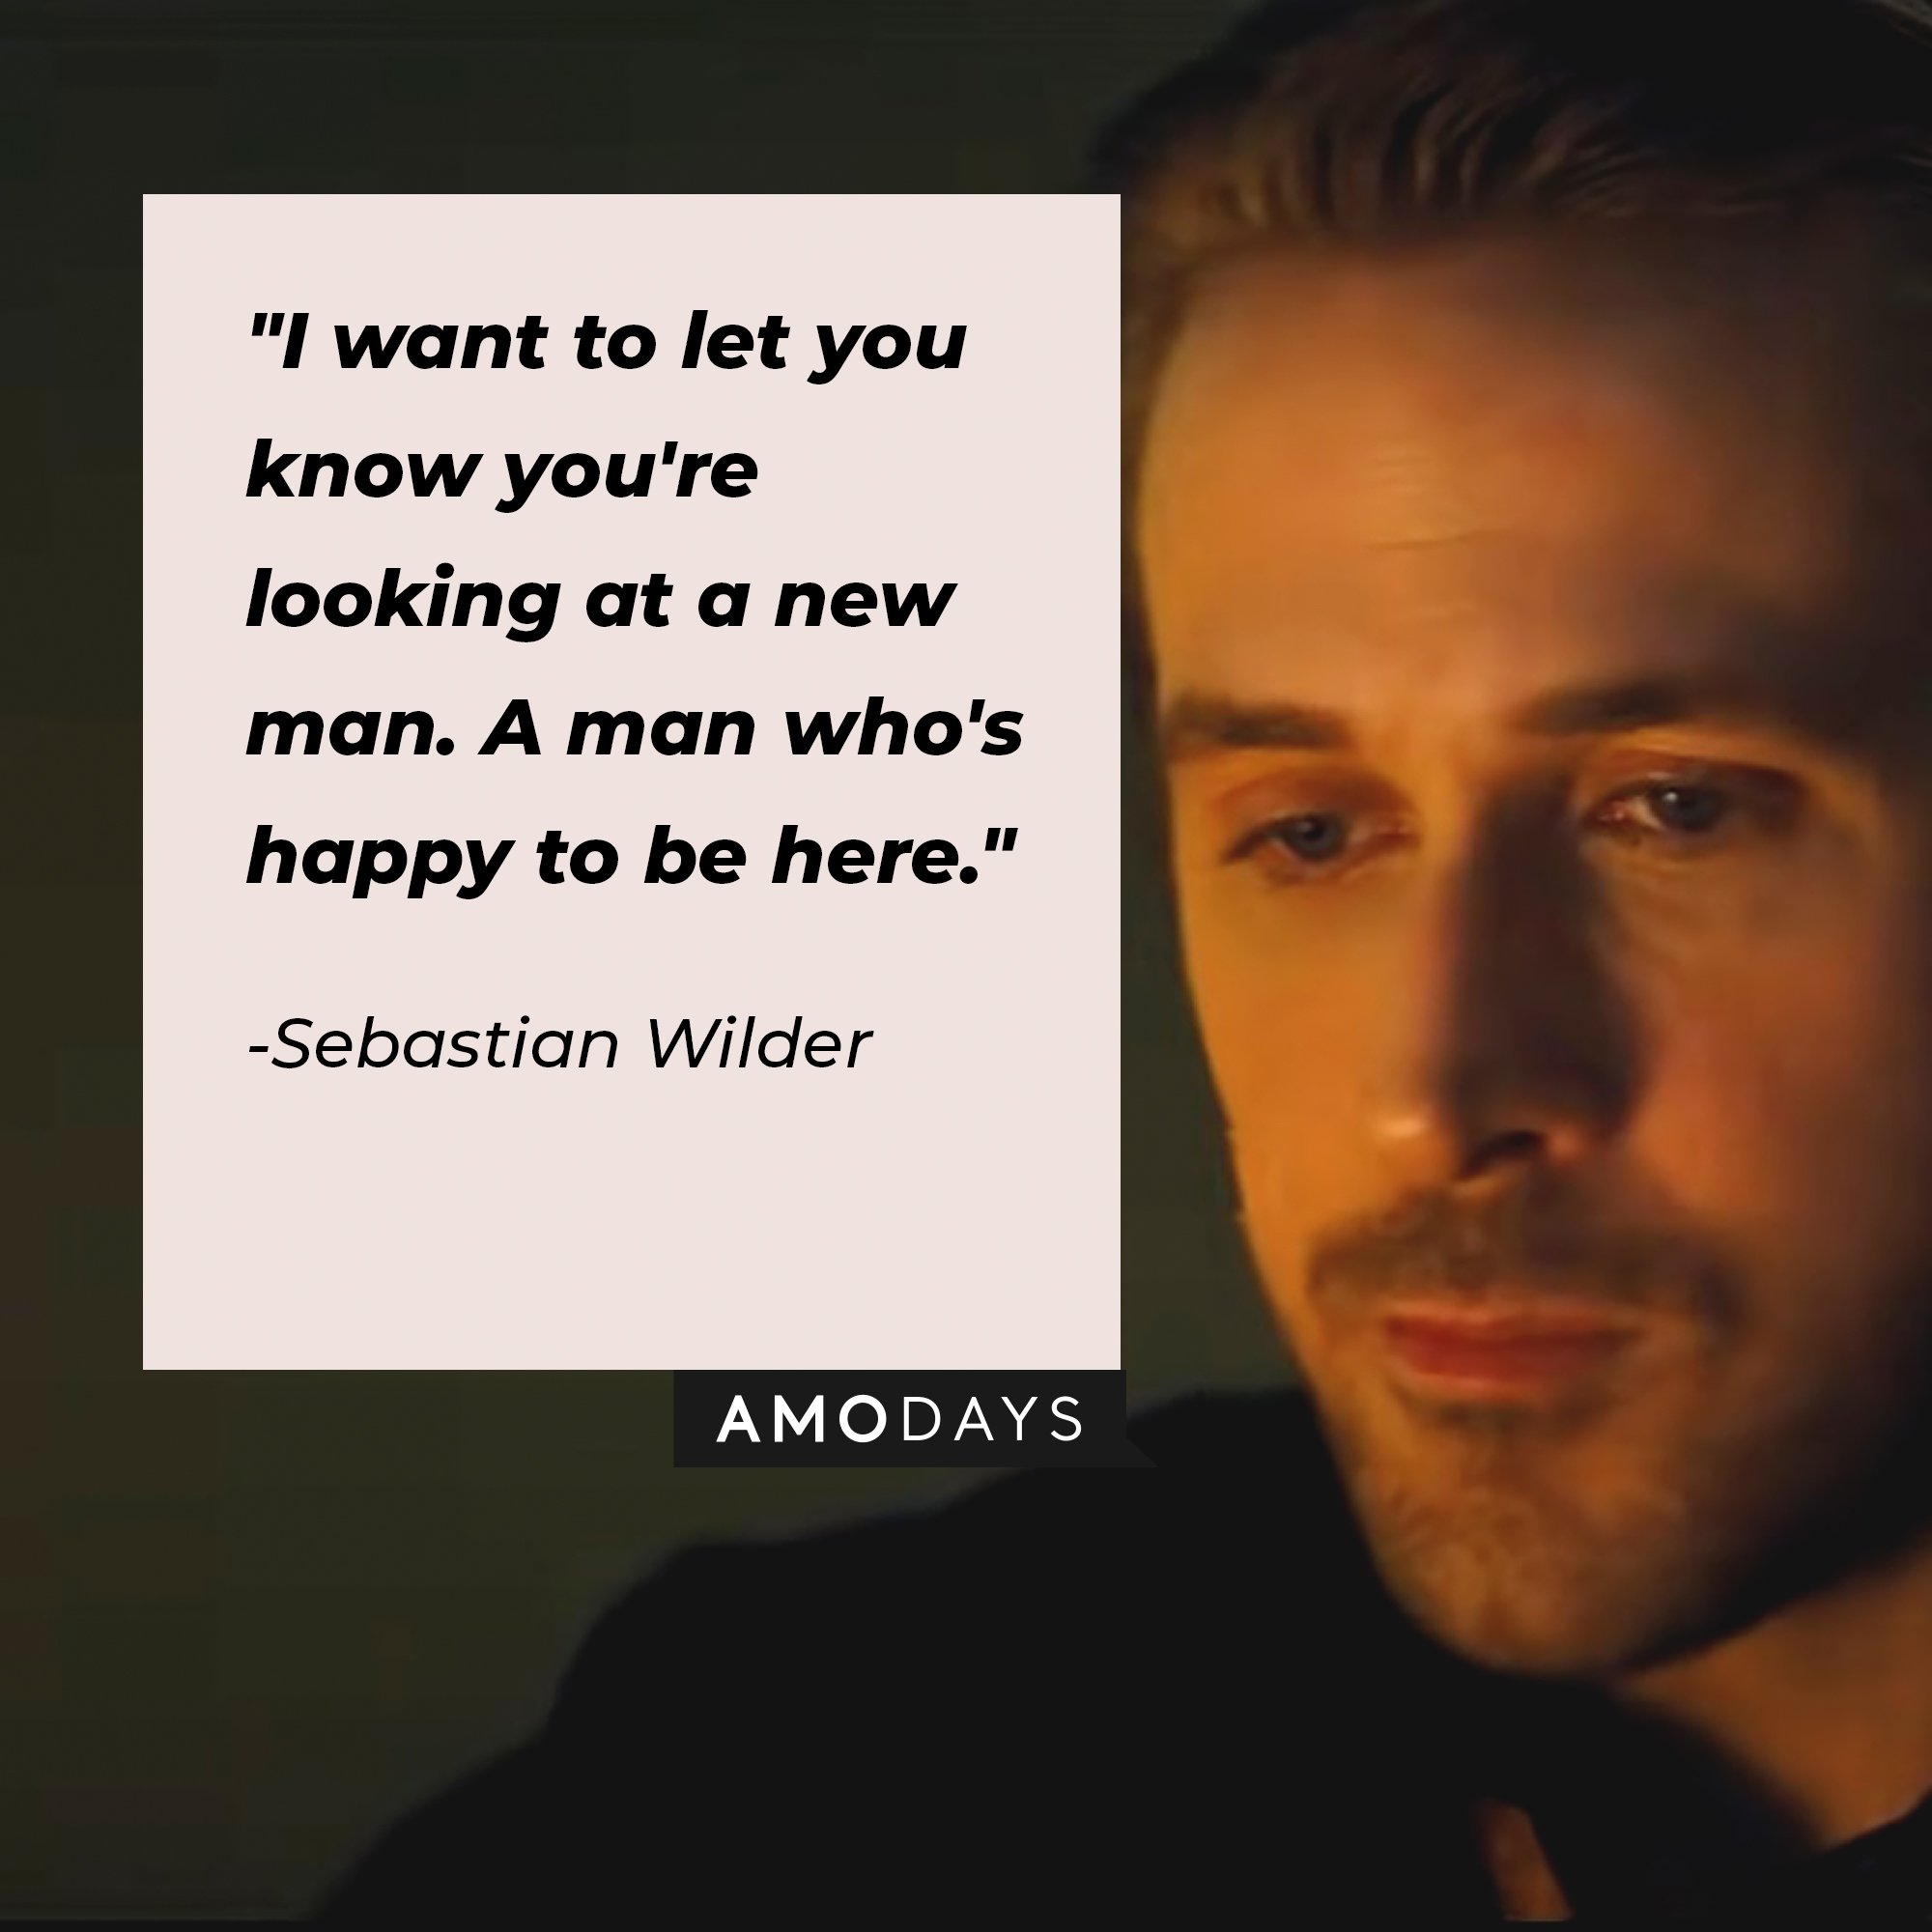 Sebastian Wilder’s quote: "I want to let you know you're looking at a new man. A man who's happy to be here." | Image: AmoDays